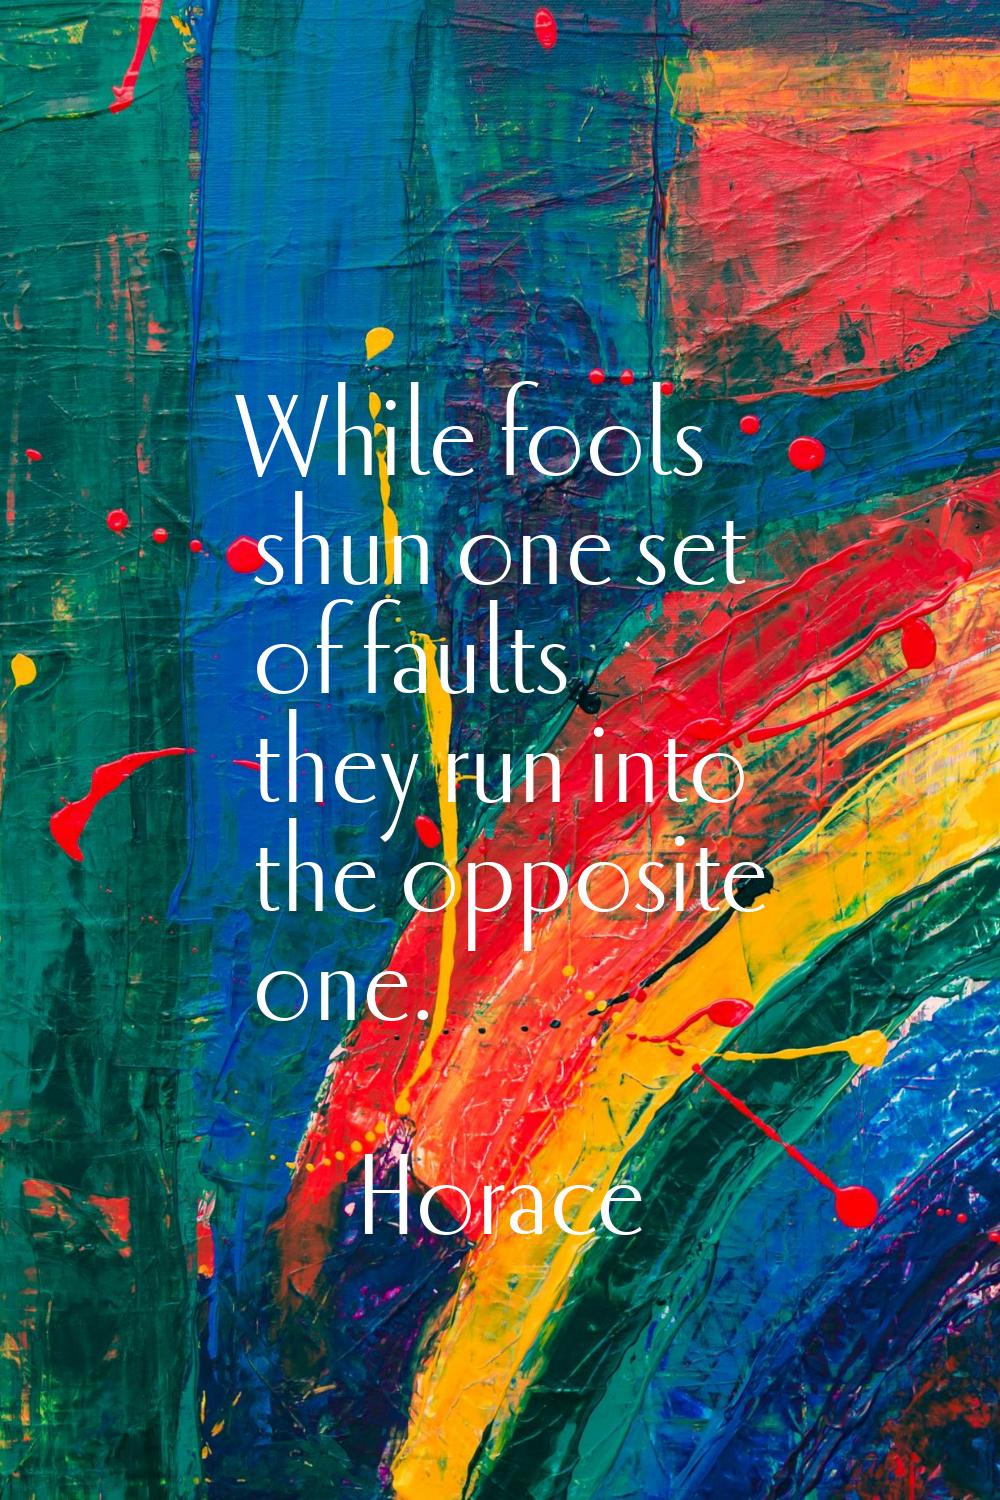 While fools shun one set of faults they run into the opposite one.